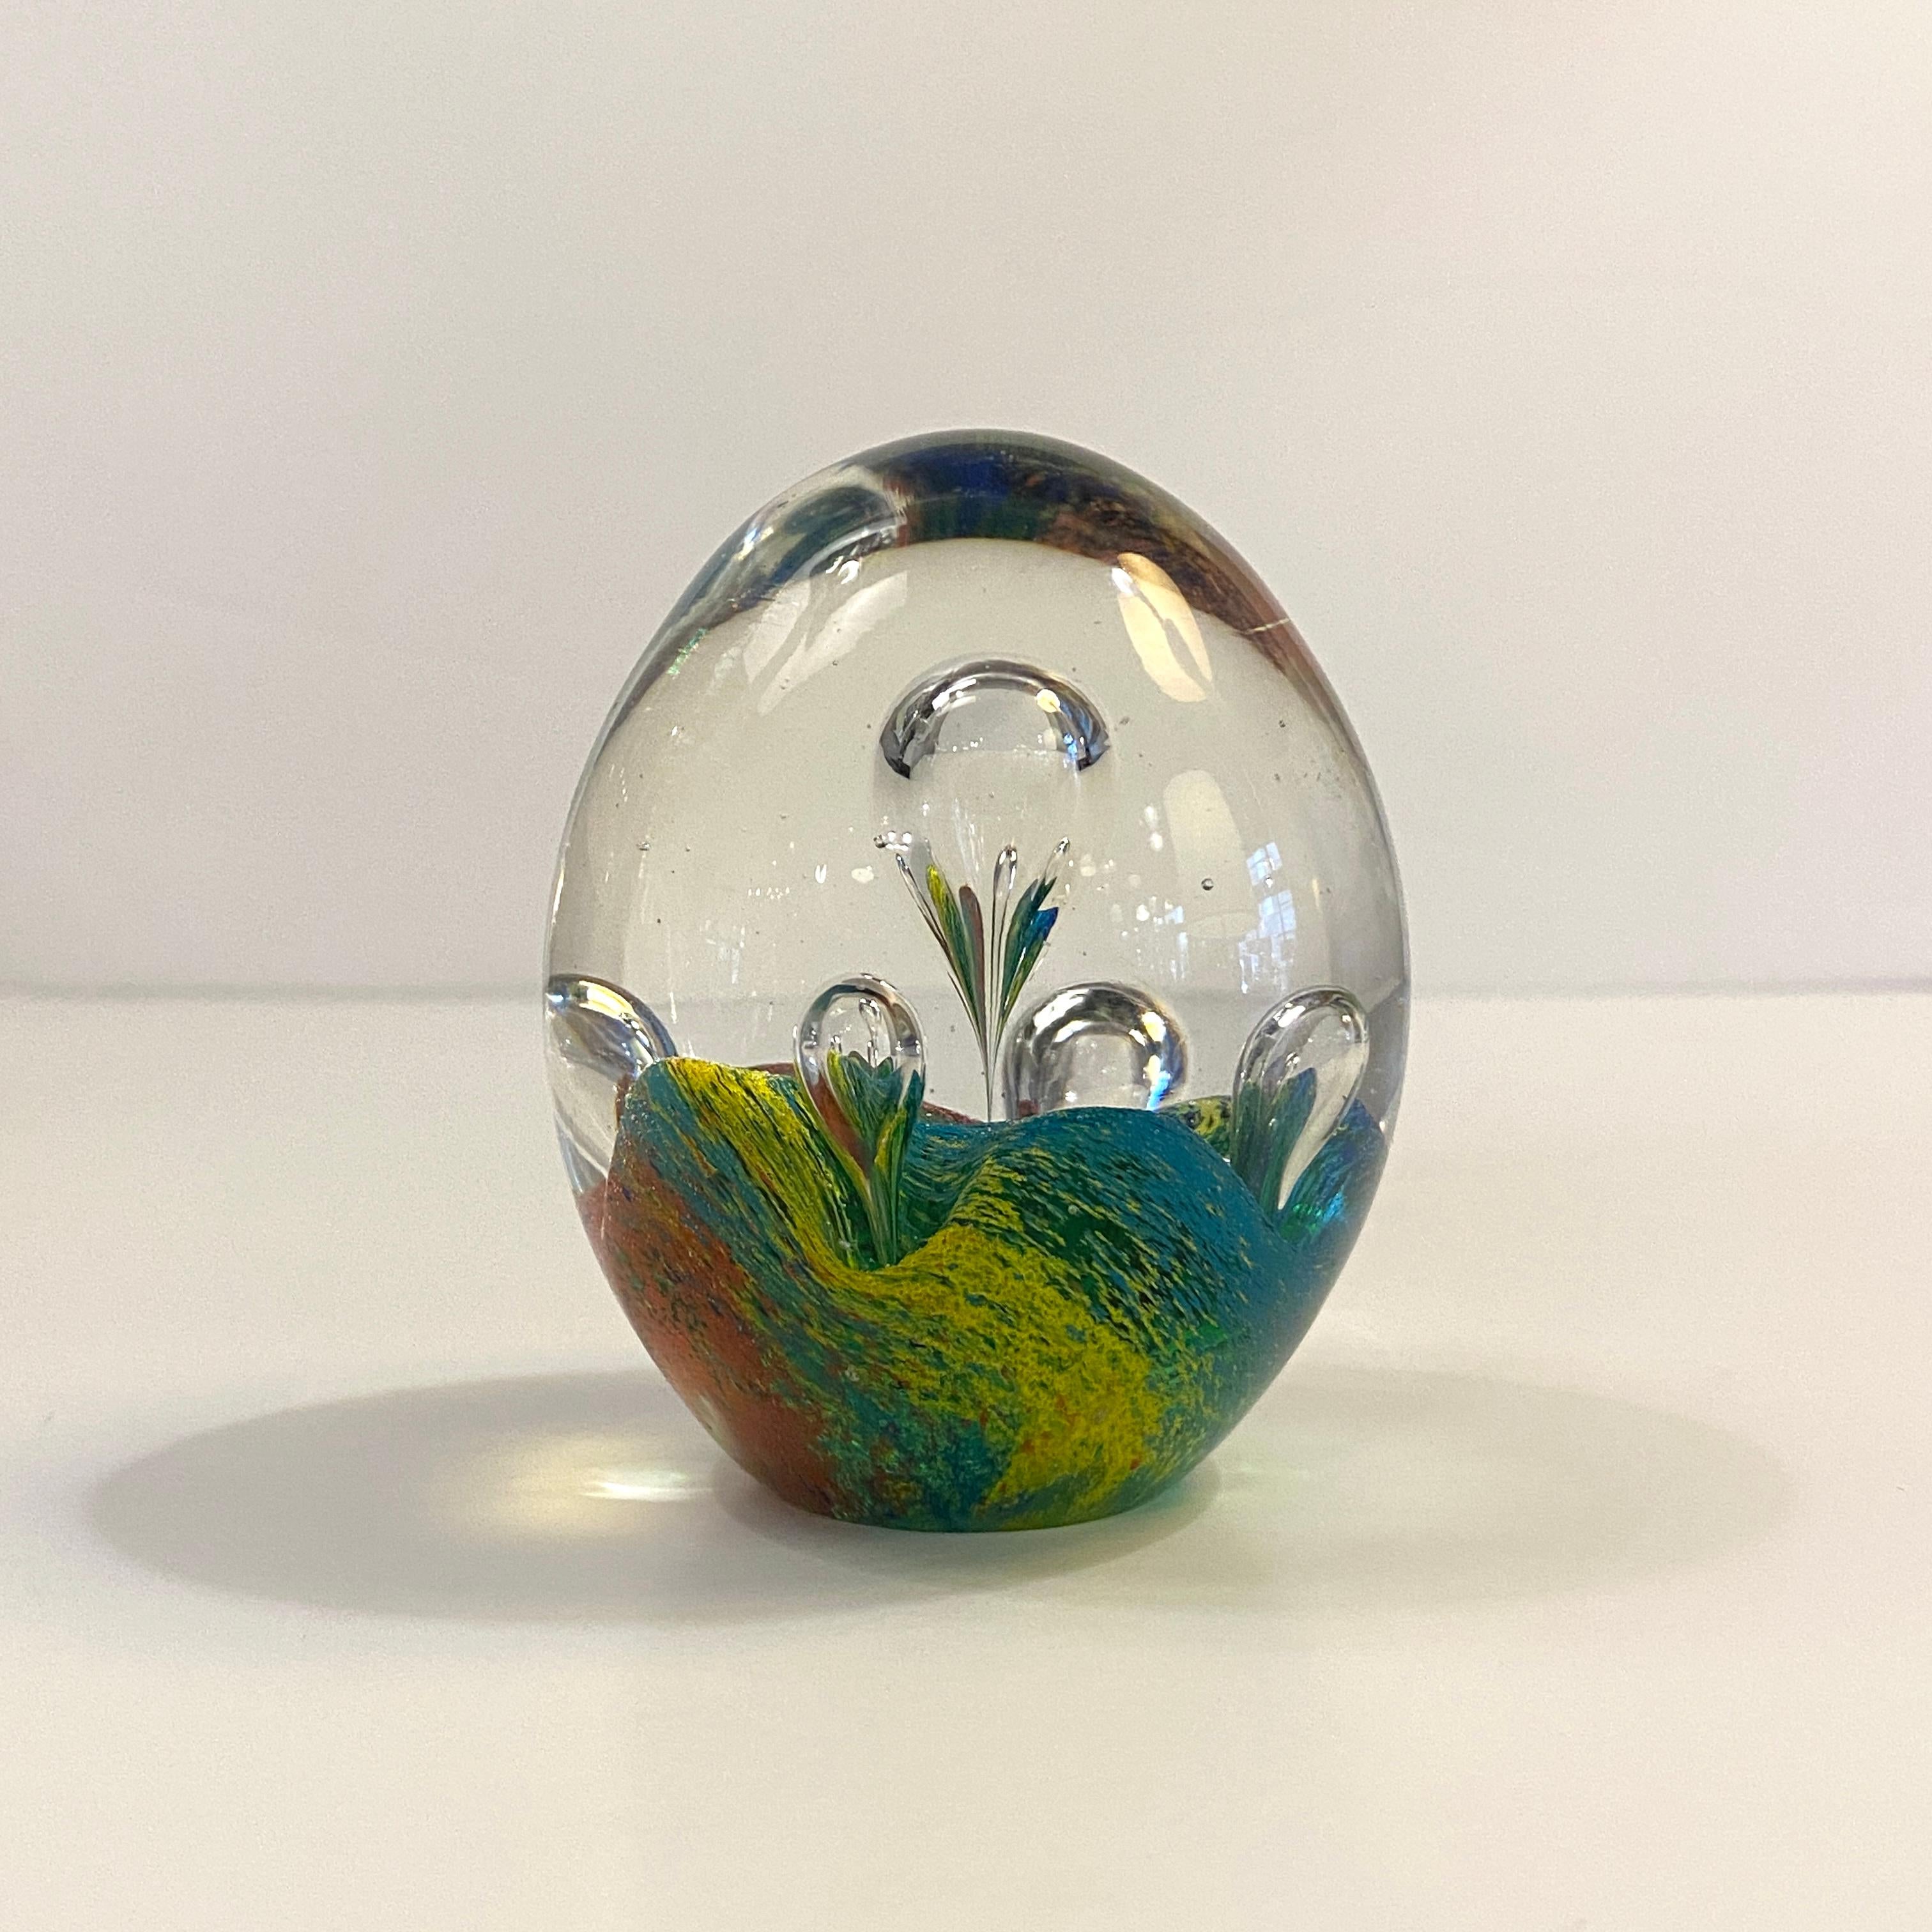 Oval shaped, artisan-made, hand-blown, Italian Murano art glass paperweight features a bed of colorful teal, blue, yellow, and red with clear bubbles rising resembling hot air balloons. It's a wonderful decorative object or desk paperweight.